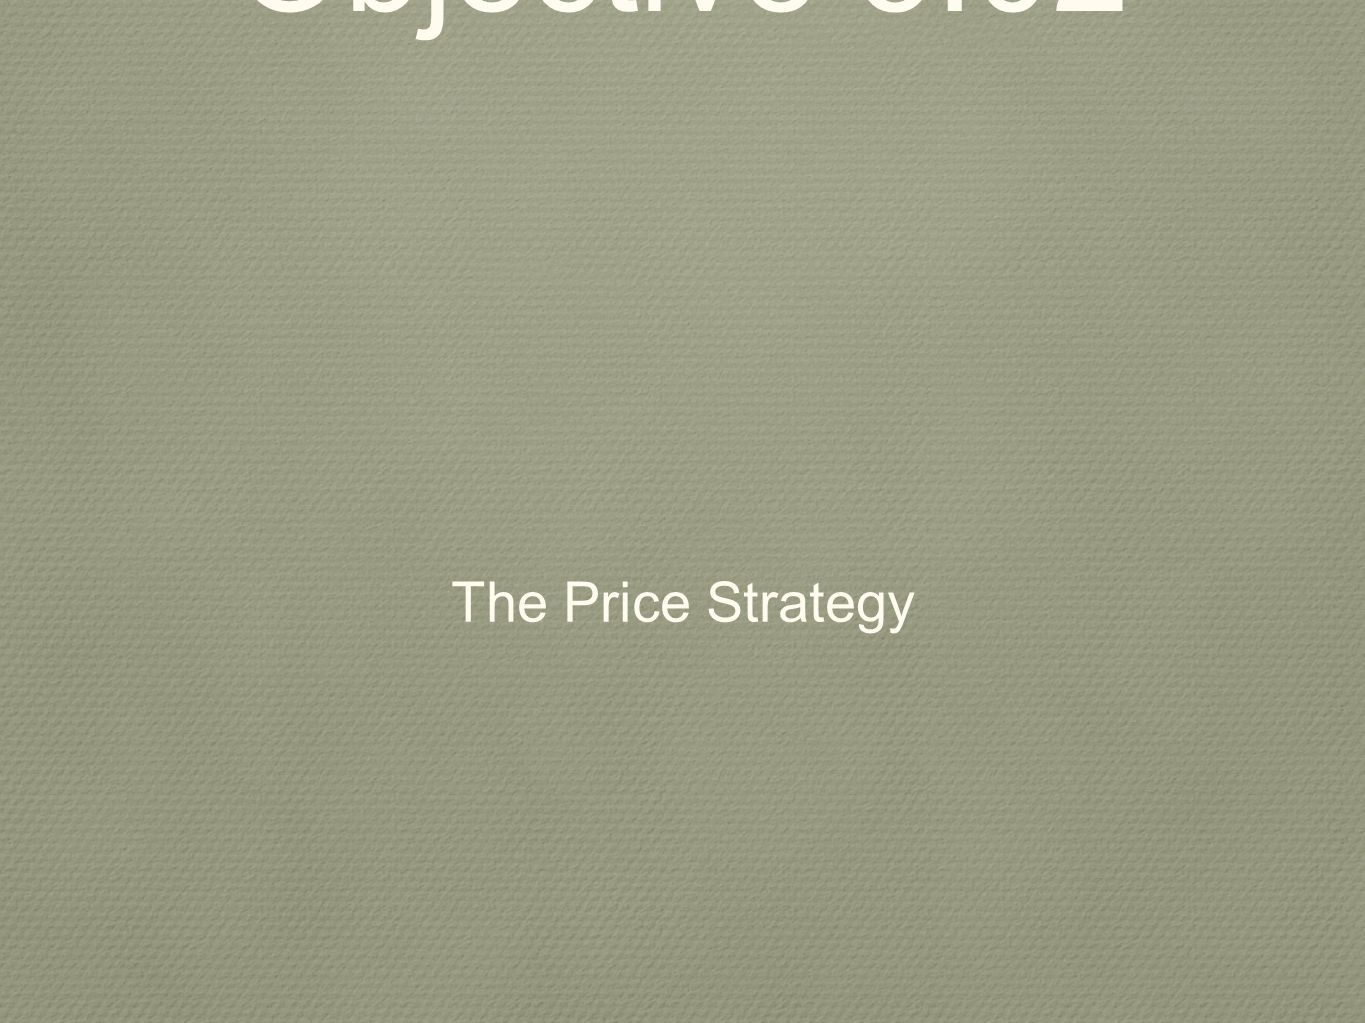 Objective 5.02 The Price Strategy